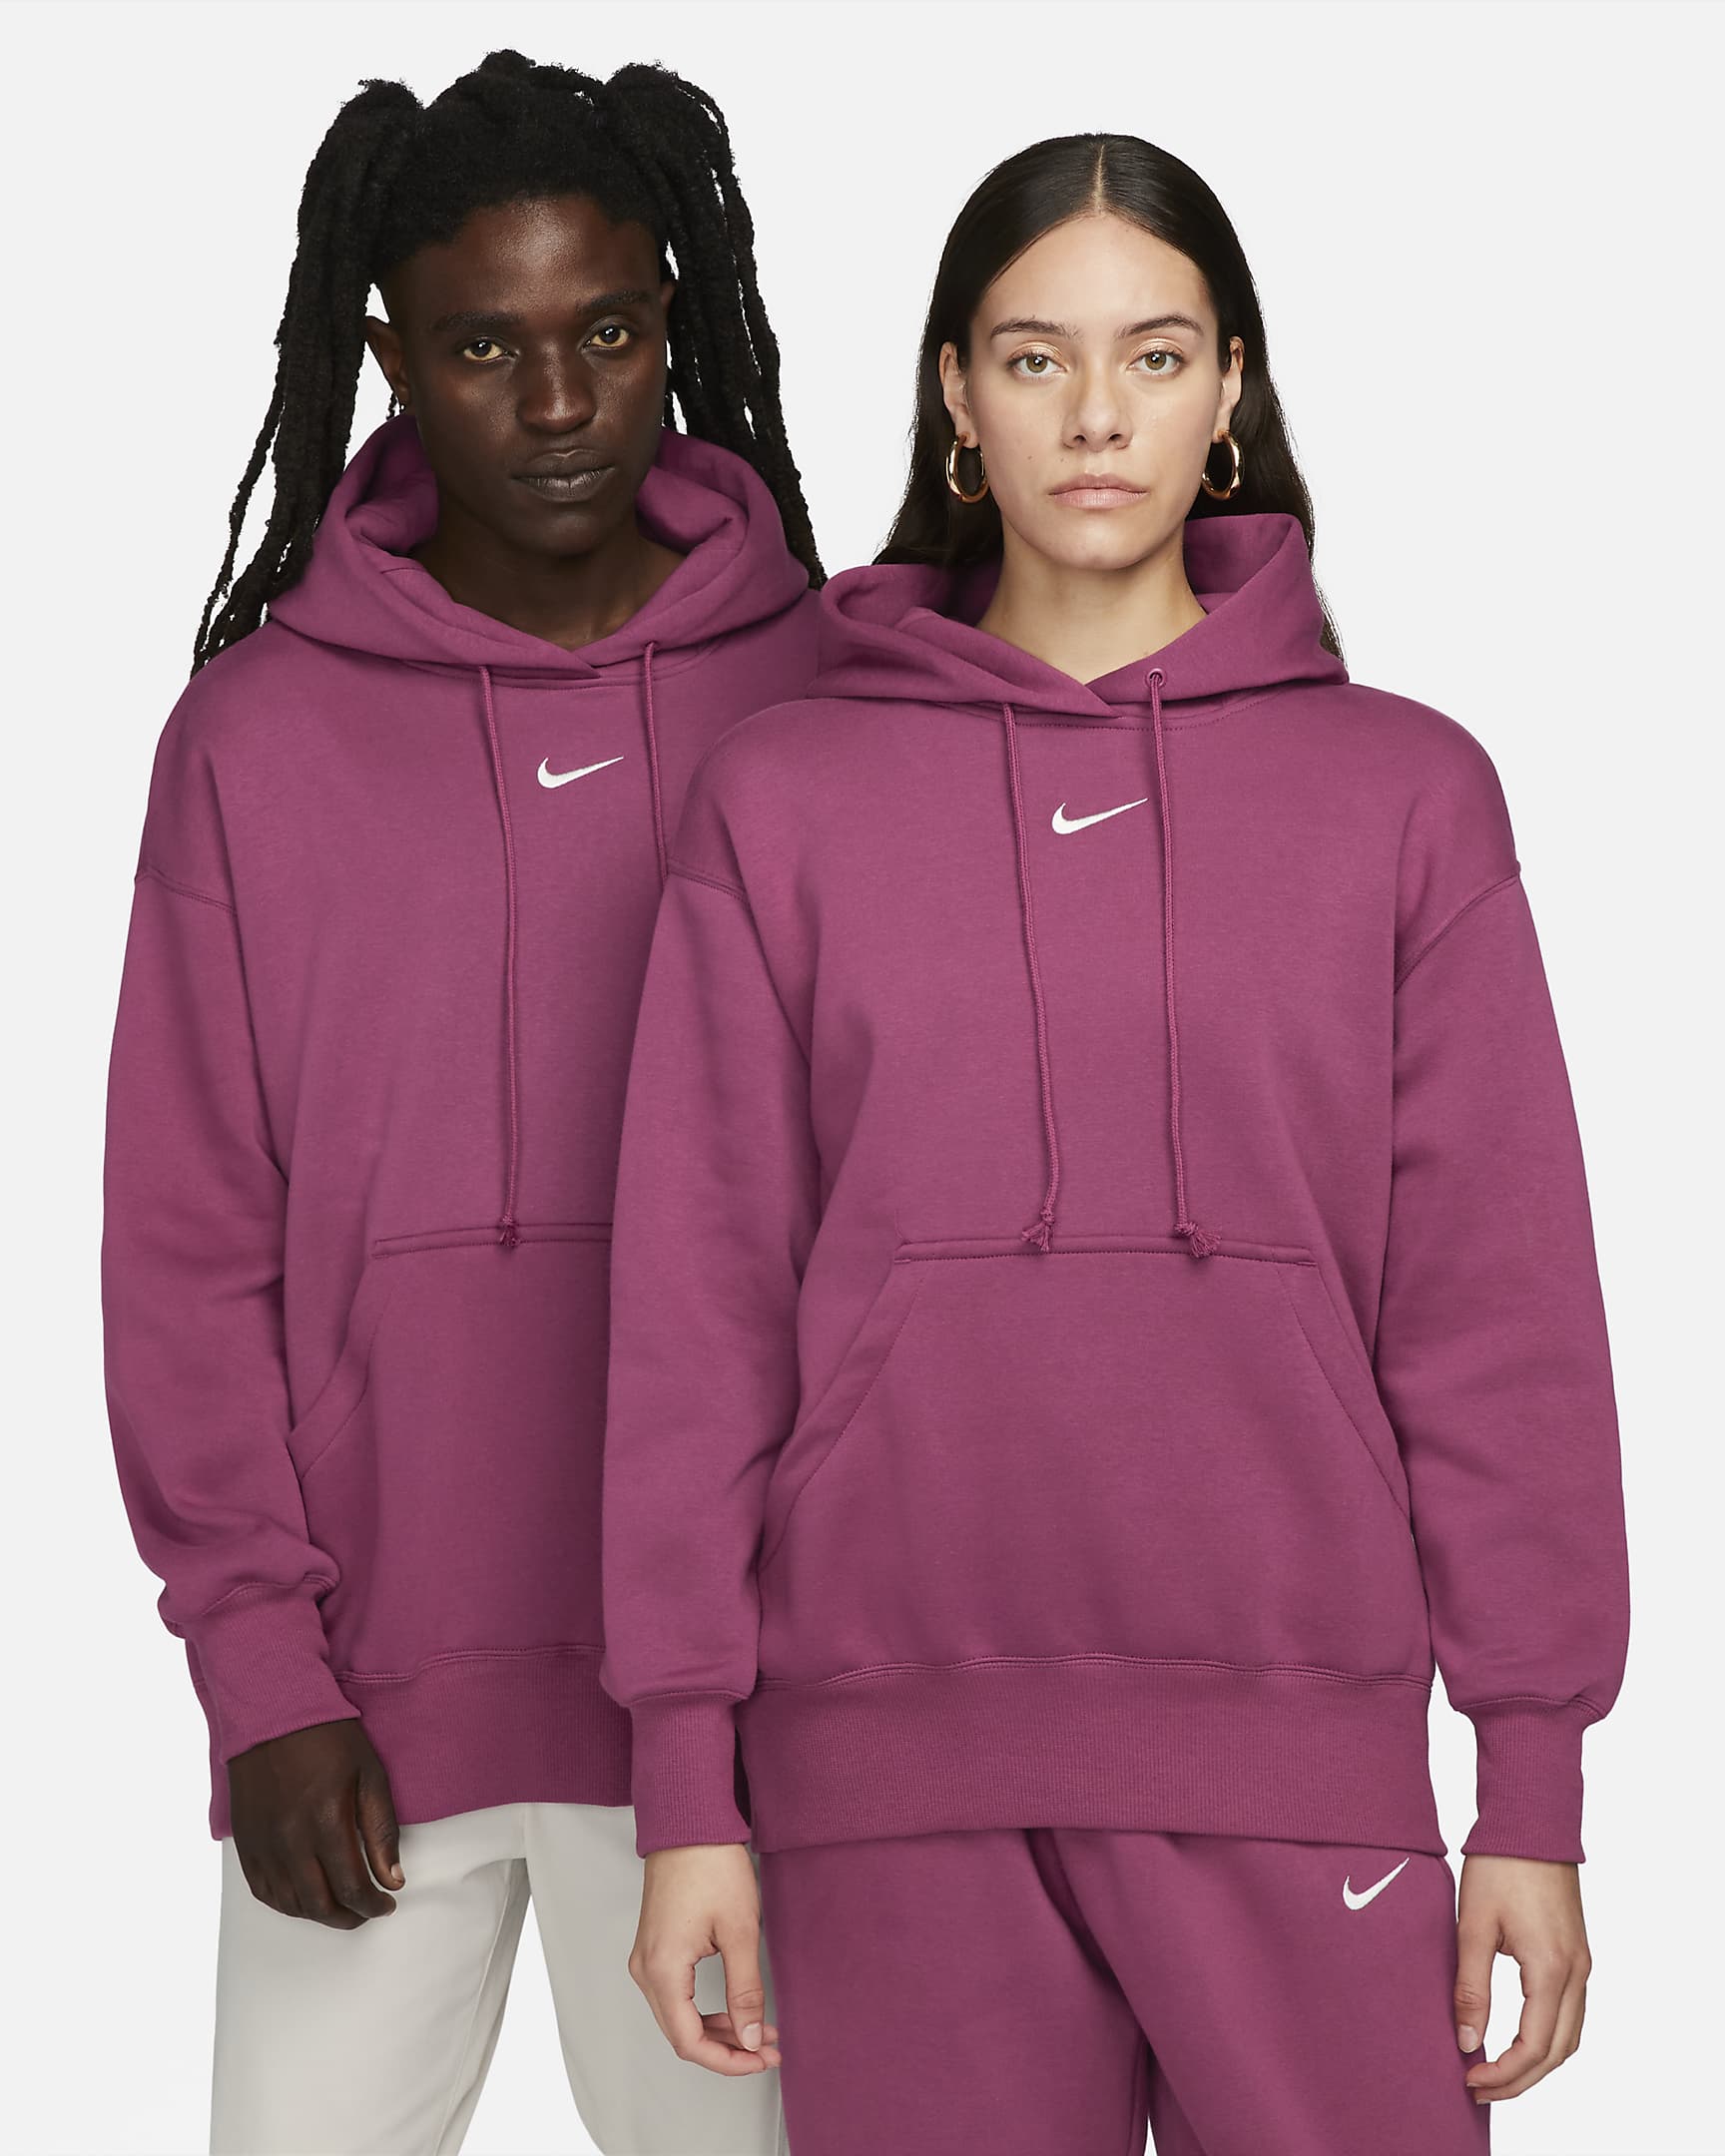 Nike Ultimate Member Sale: Up to 50% off + an extra 20% off on Select Styles